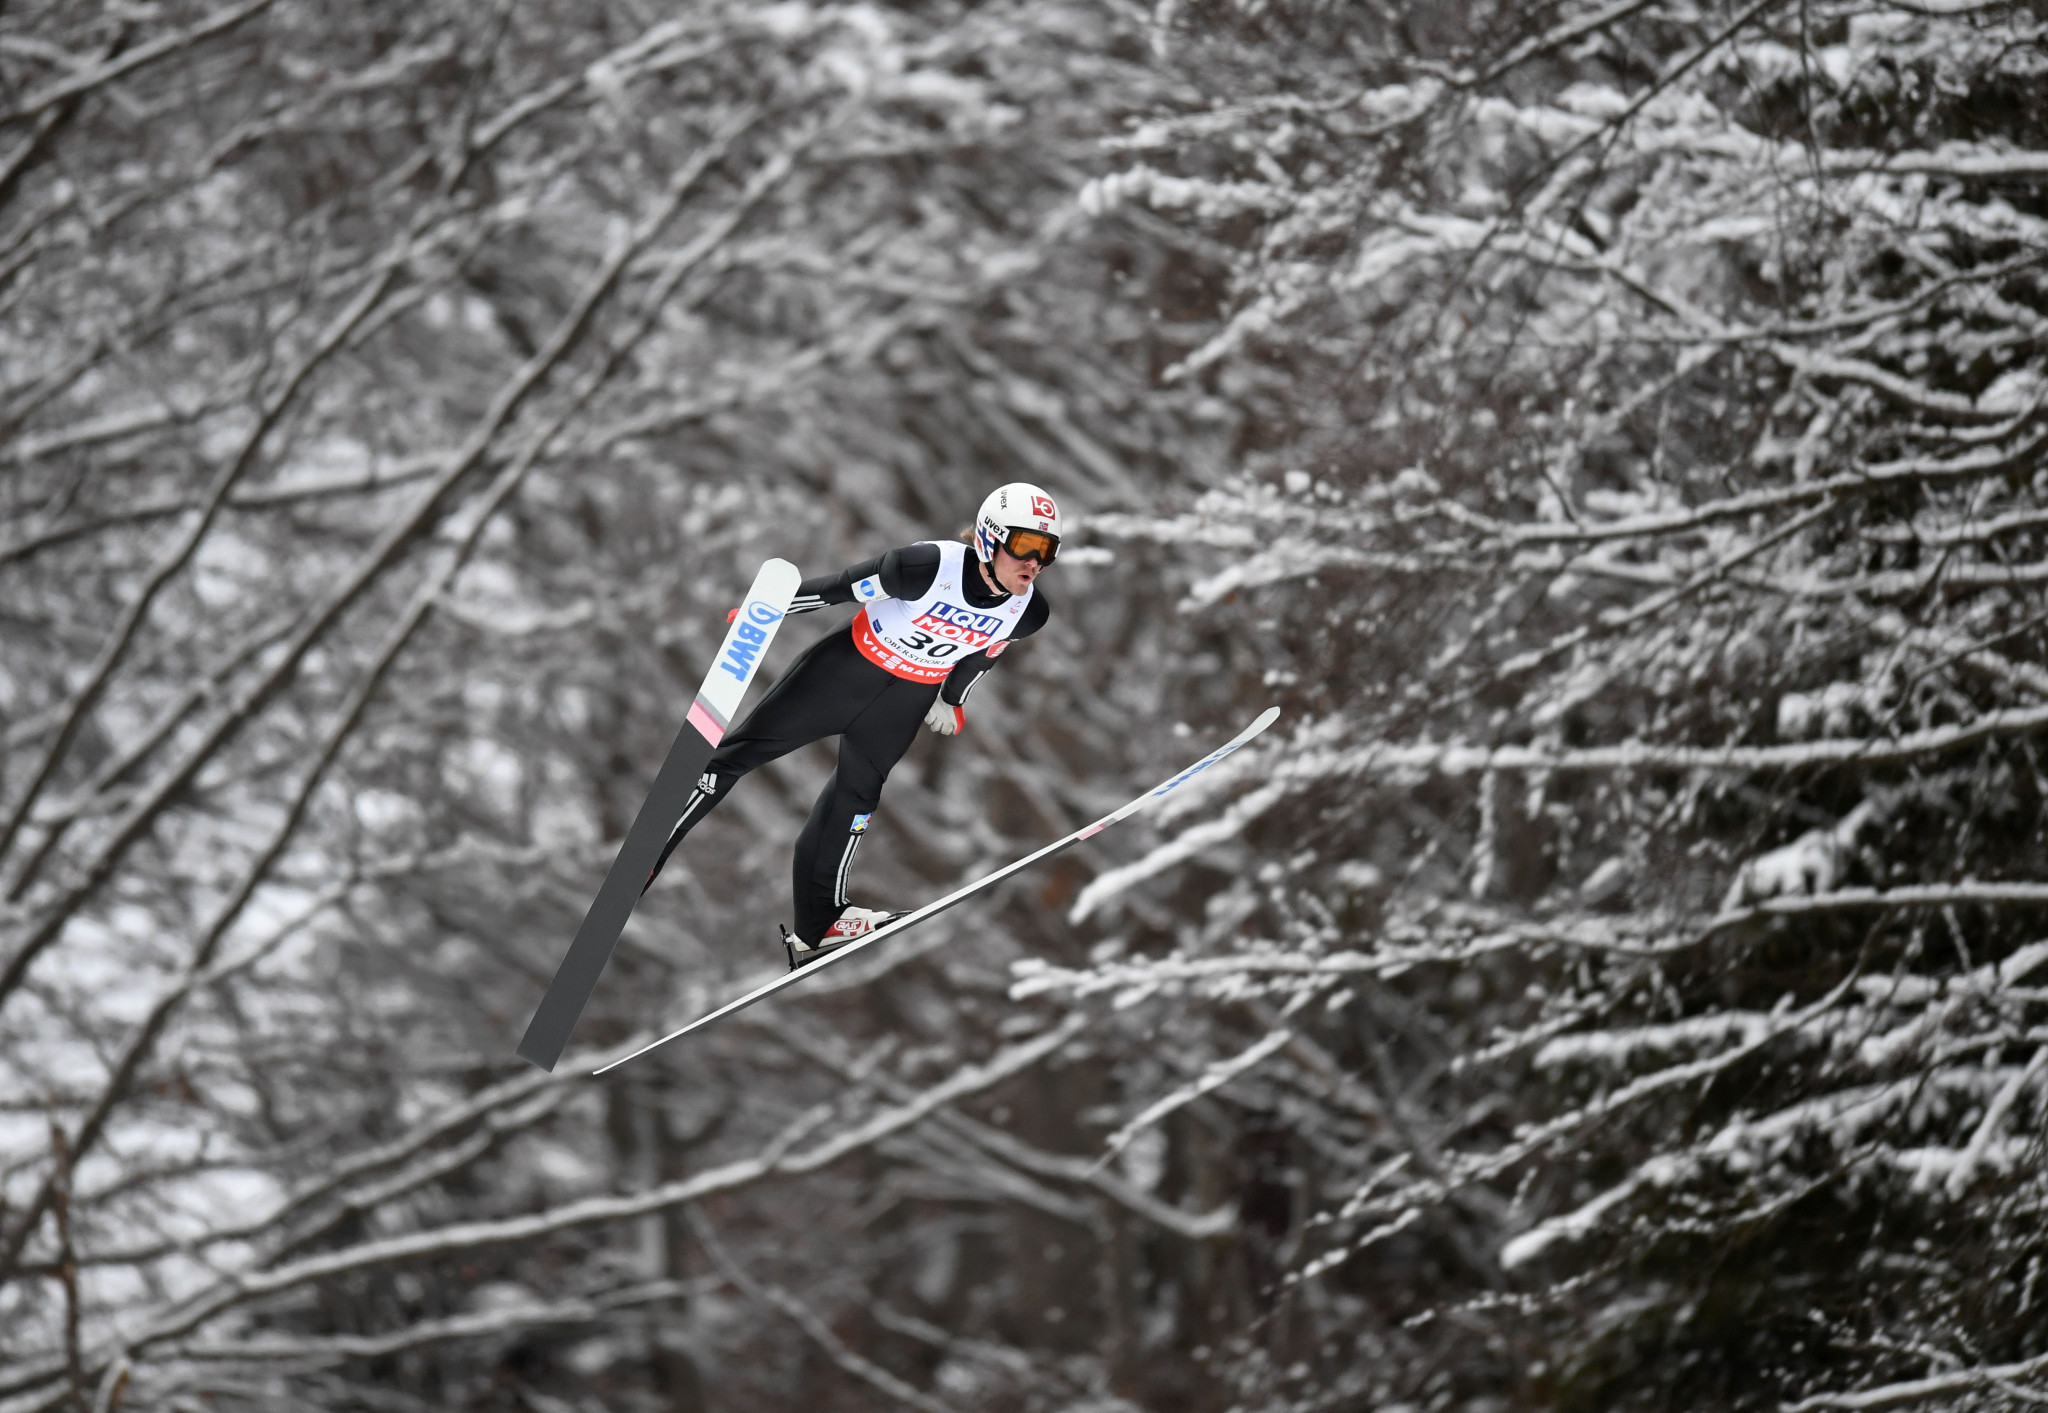 Tande takes FIS Ski Flying World Championship tile in Oberstdorf as Japan win FIS Ski Jumping World Cup team title